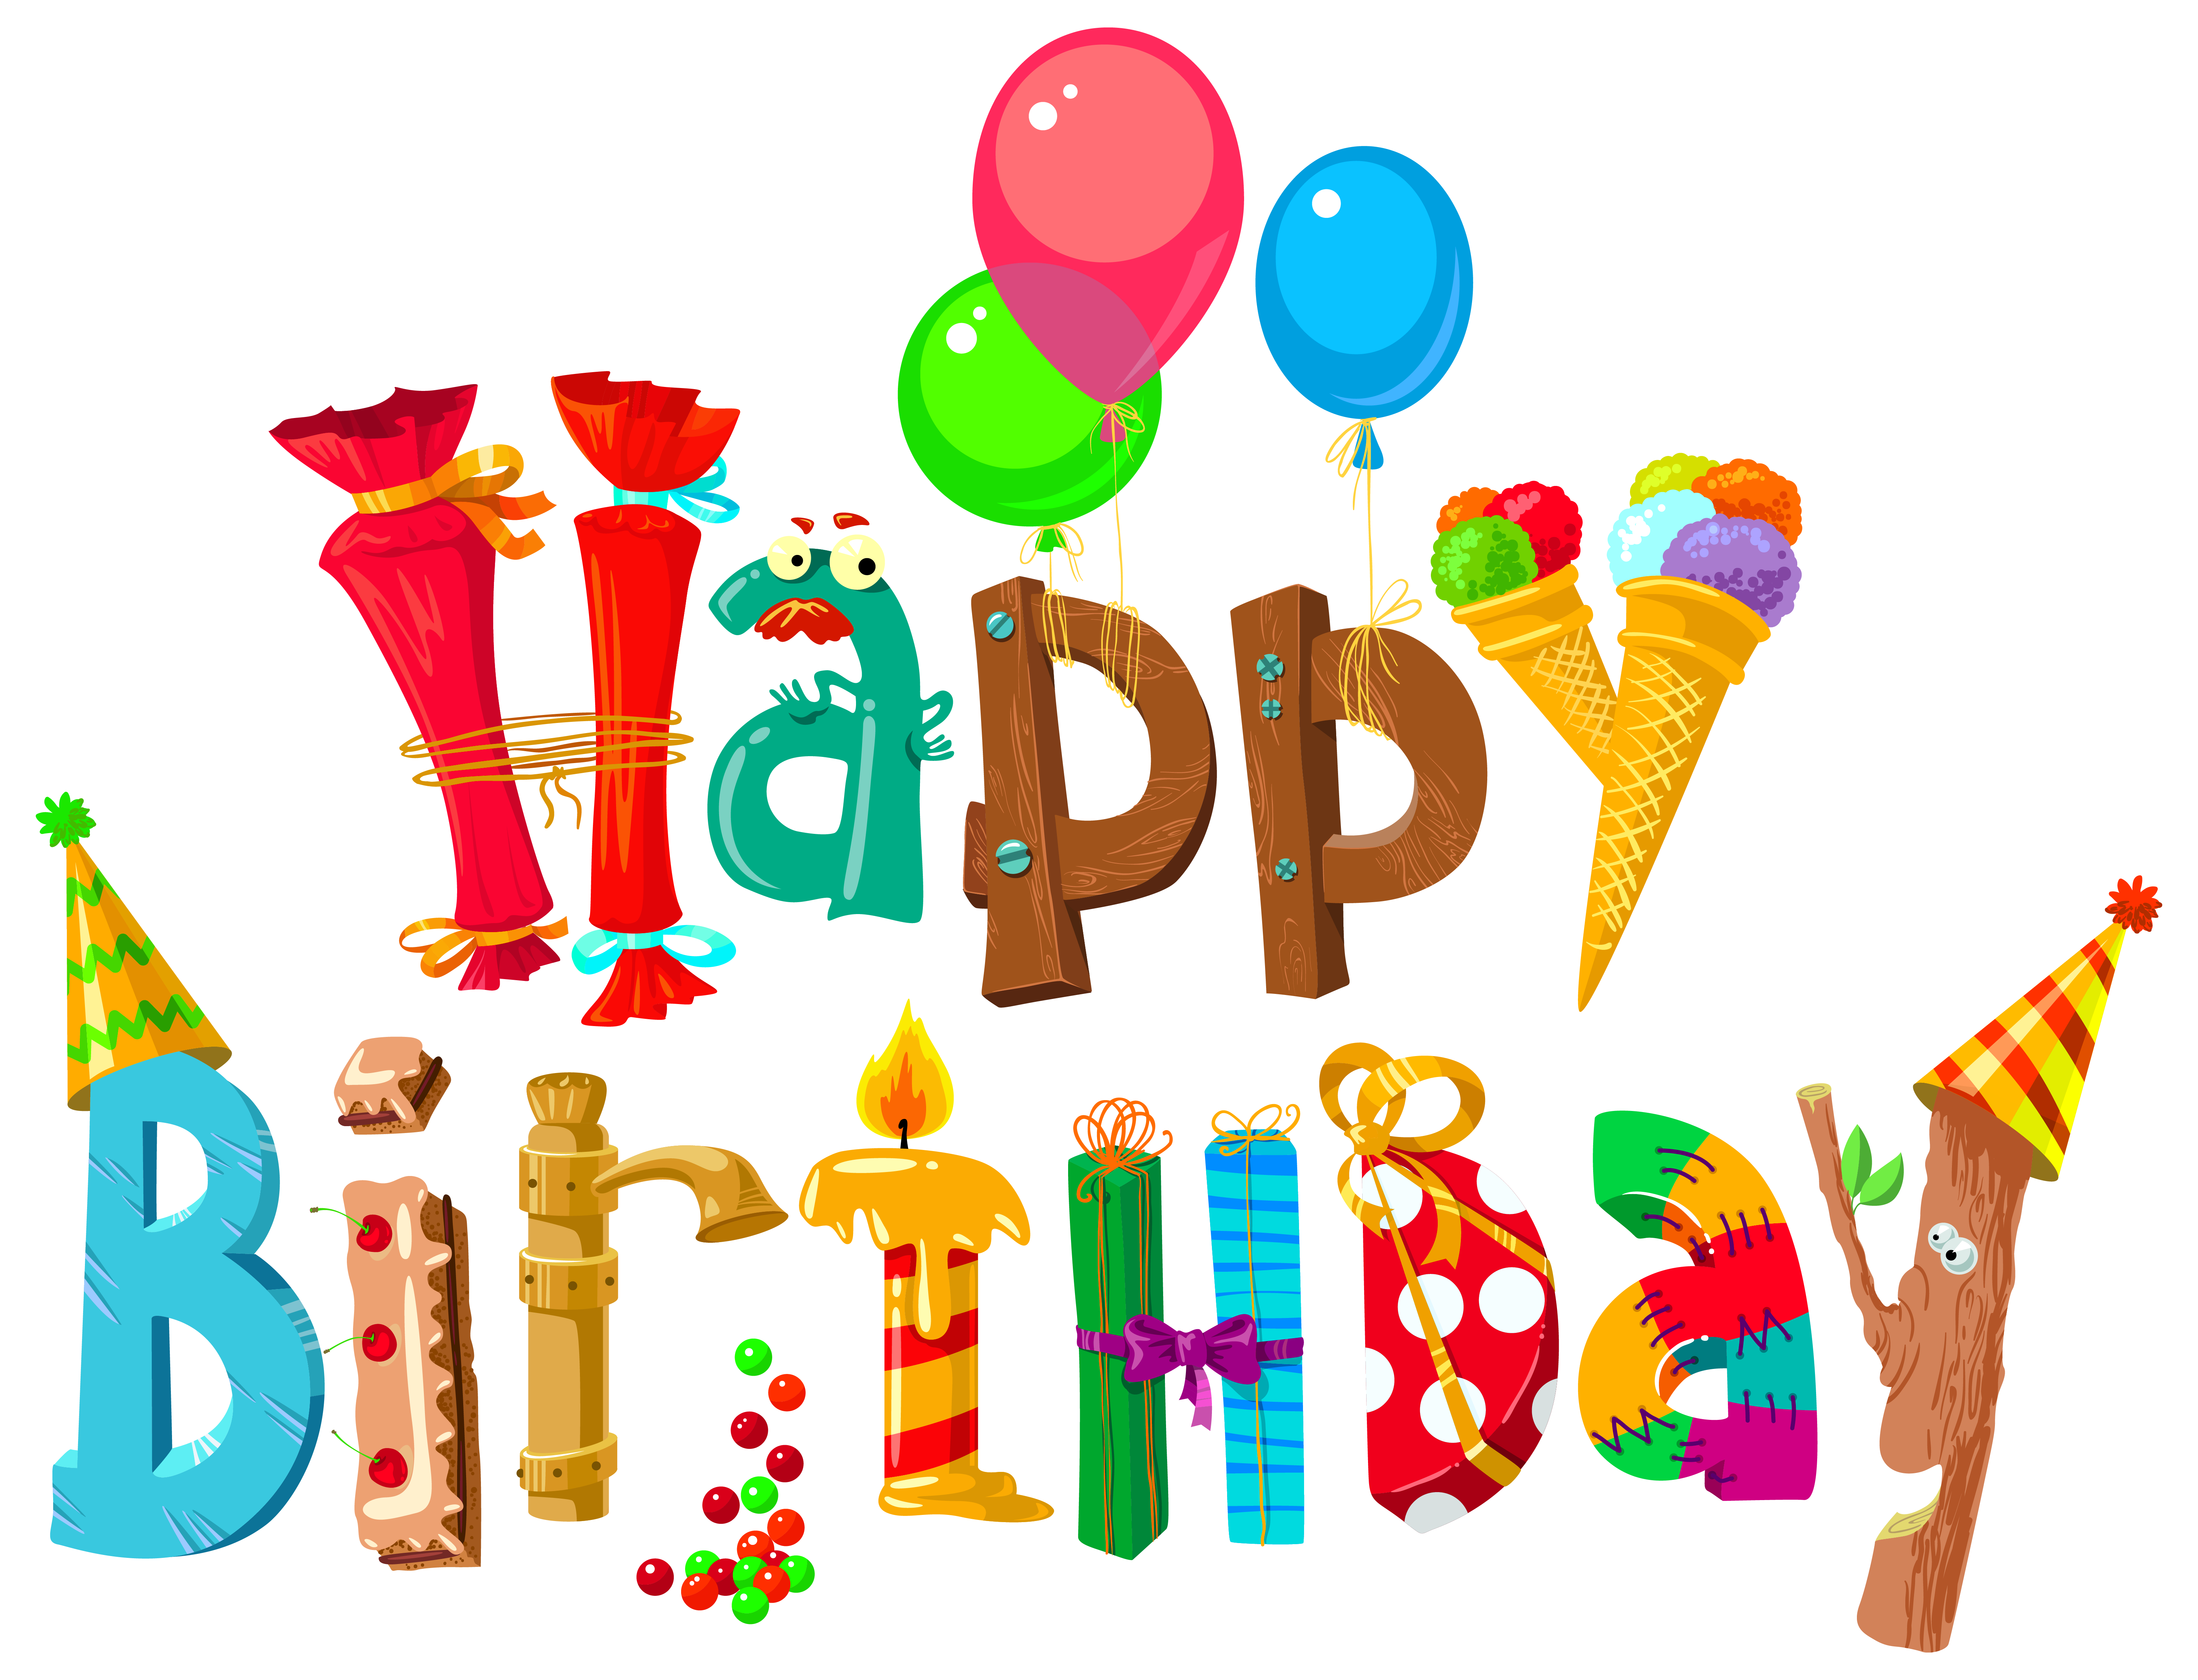 Words clipart happiness. Funny happy birthday image